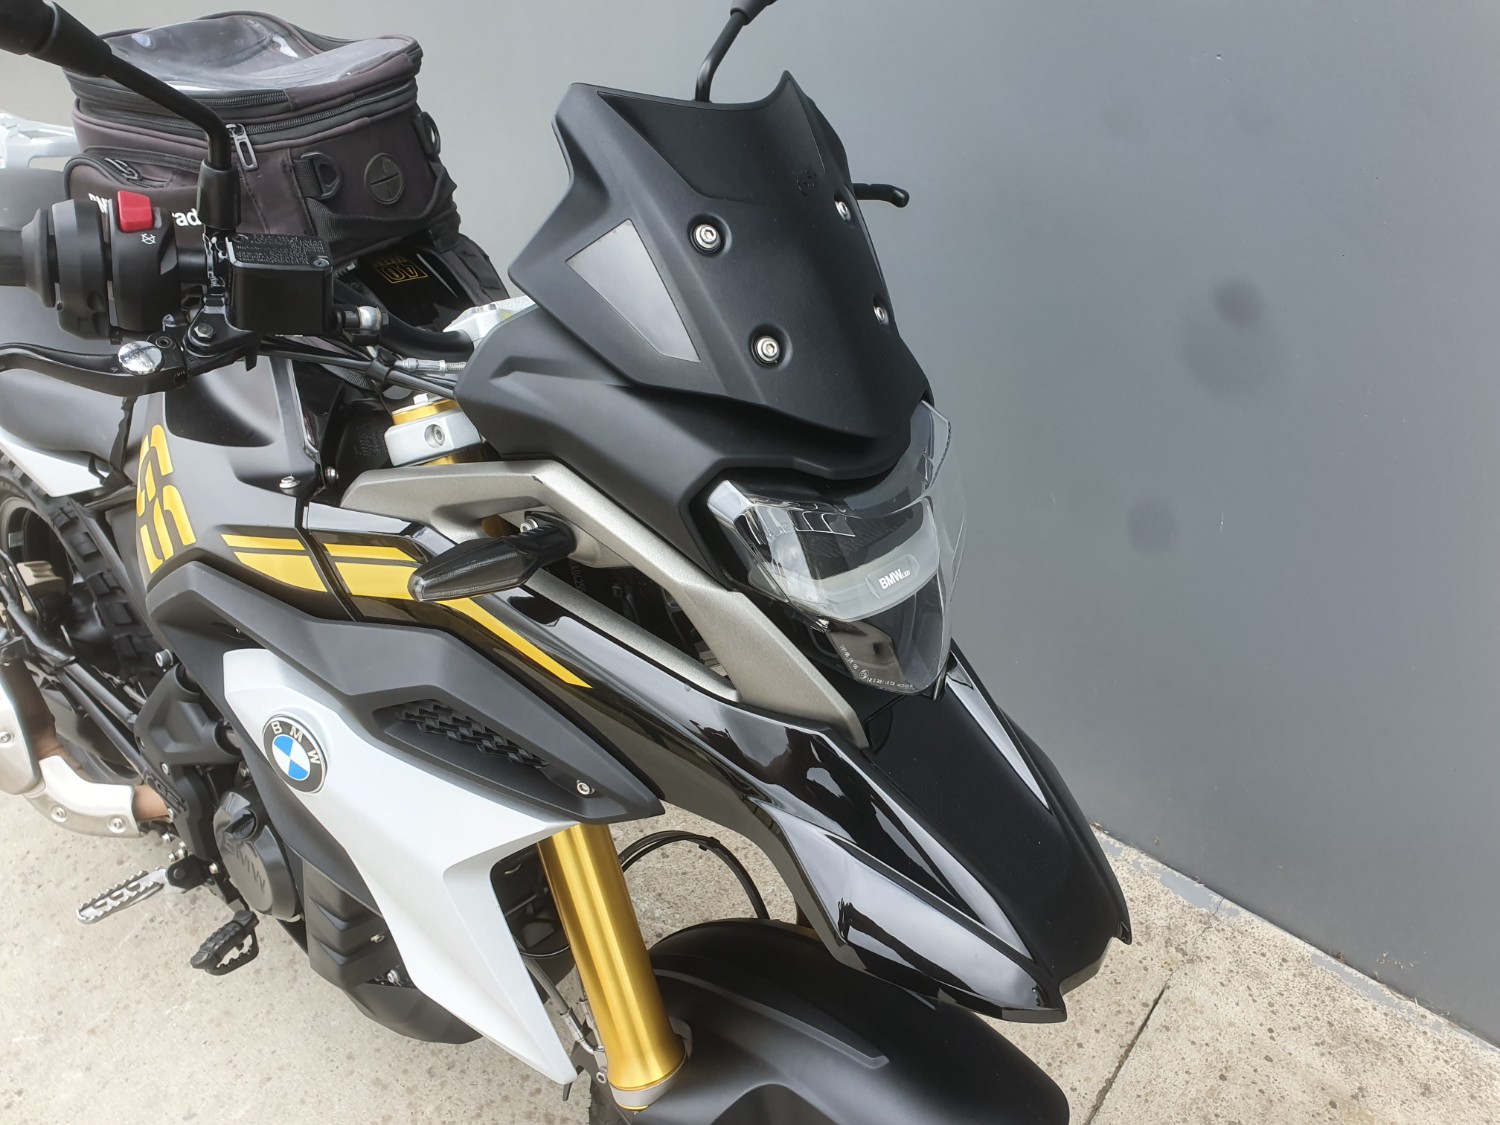 2021 BMW G 310 GS Motorcycle Image 8